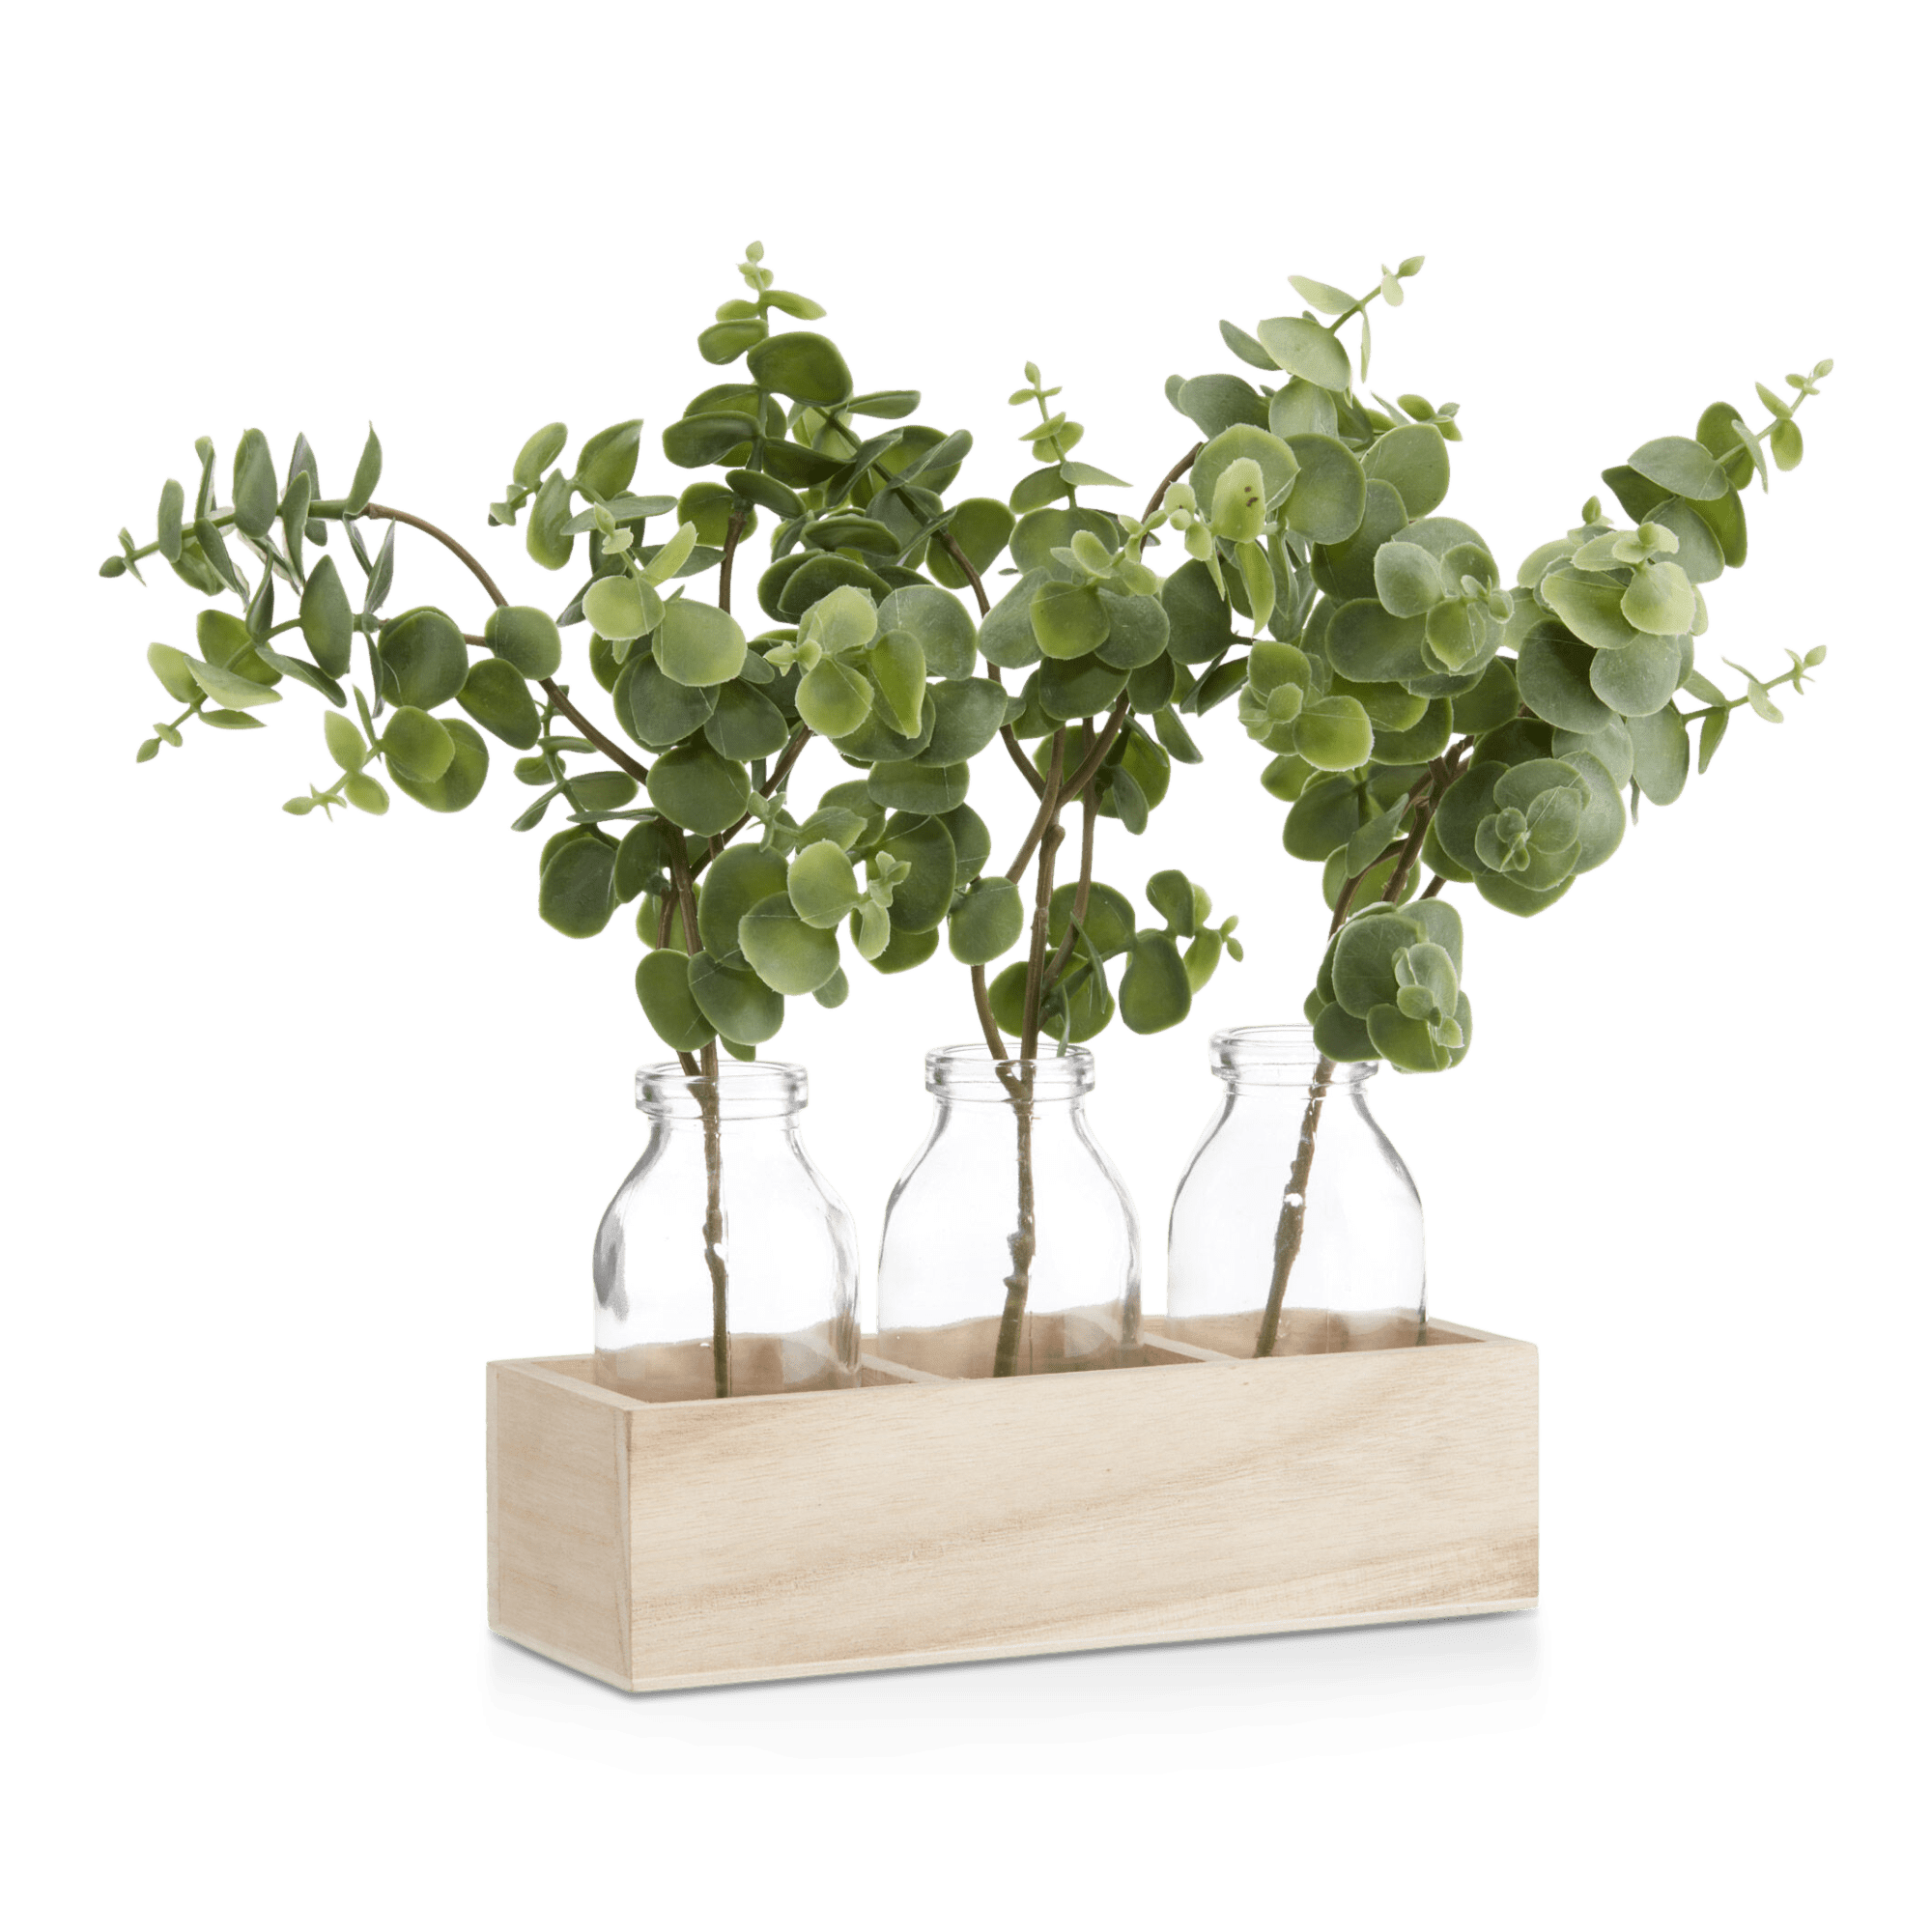 3 Eucalyptus Plants in Natural Wooden Box